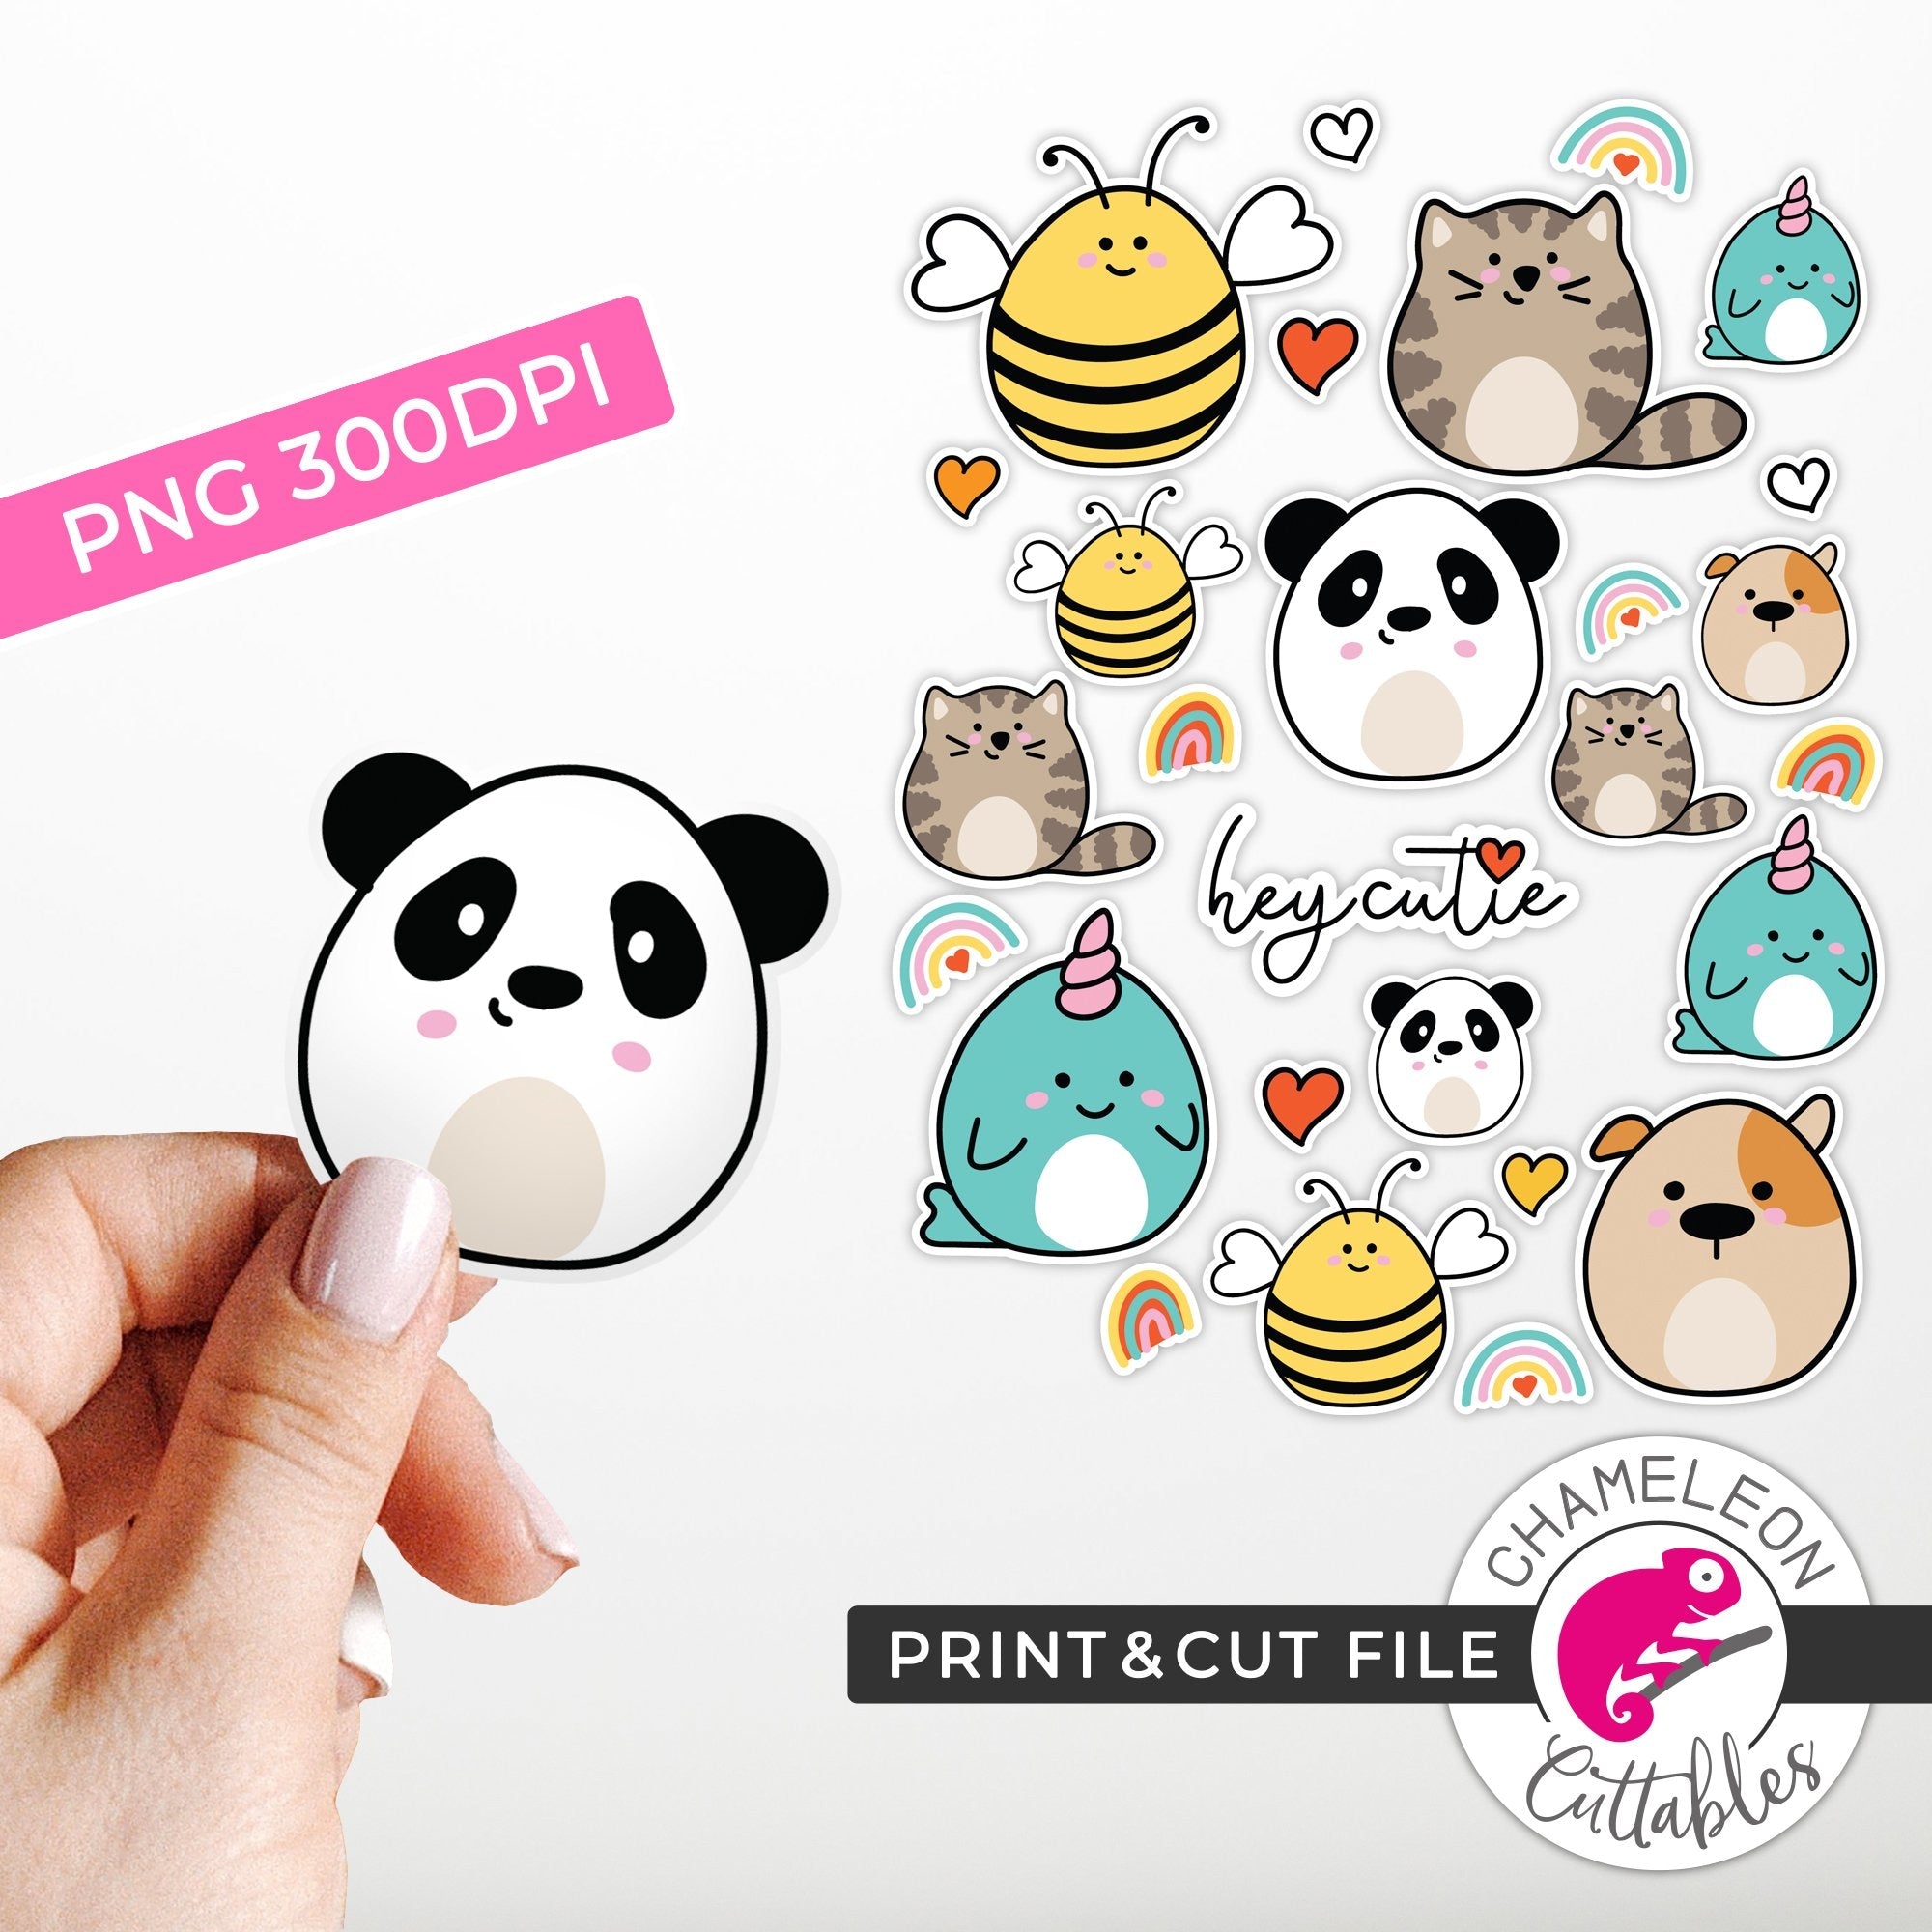 Print and Cut Cute Animal Stickers PNG Chameleon Cuttables LLC